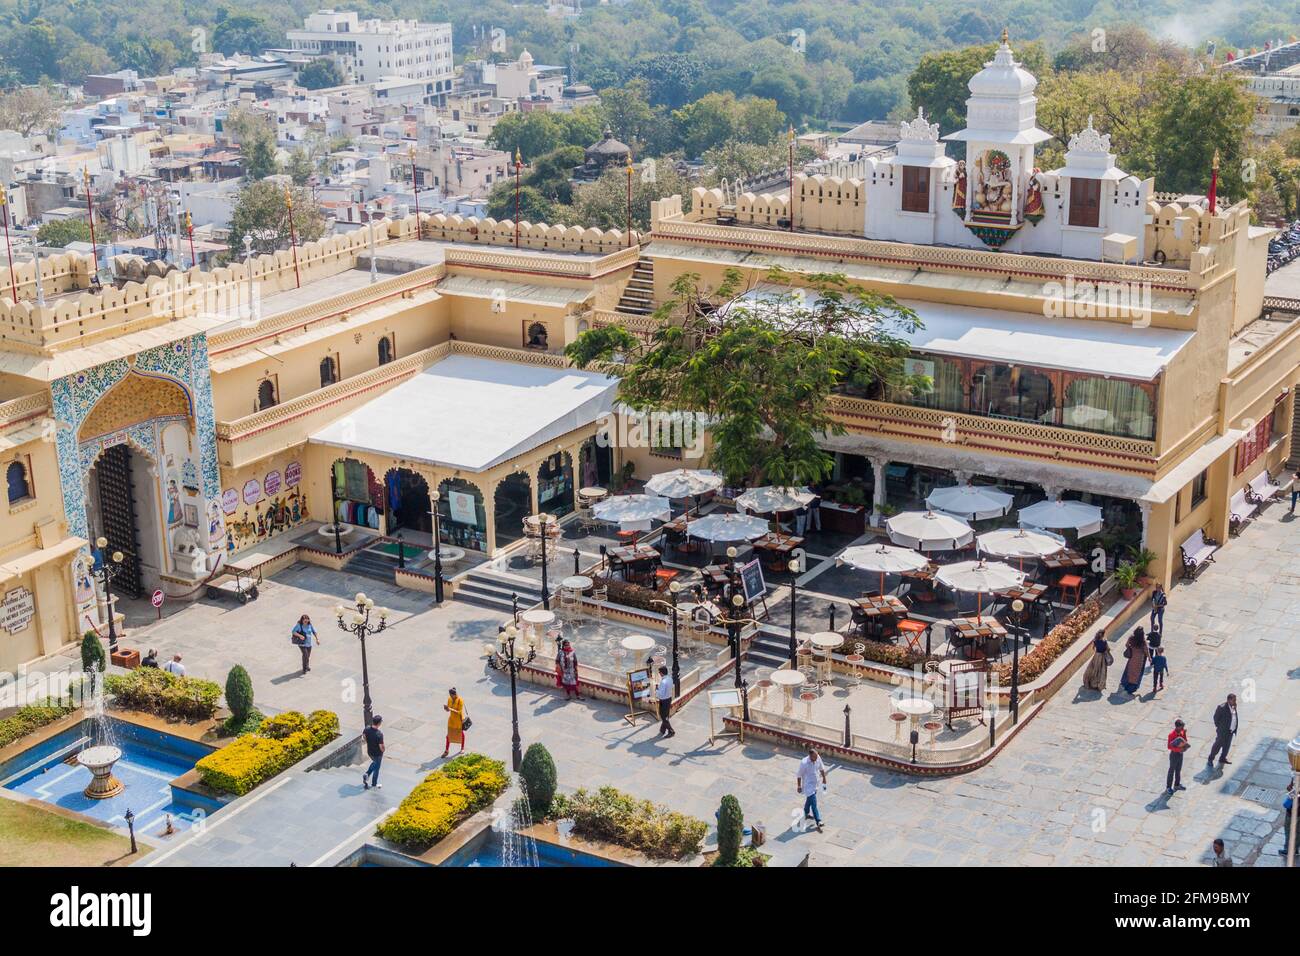 UDAIPUR, INDIA - FEBRUARY 12, 2017: Courtyard of the City palace in Udaipur, Rajasthan state, India Stock Photo